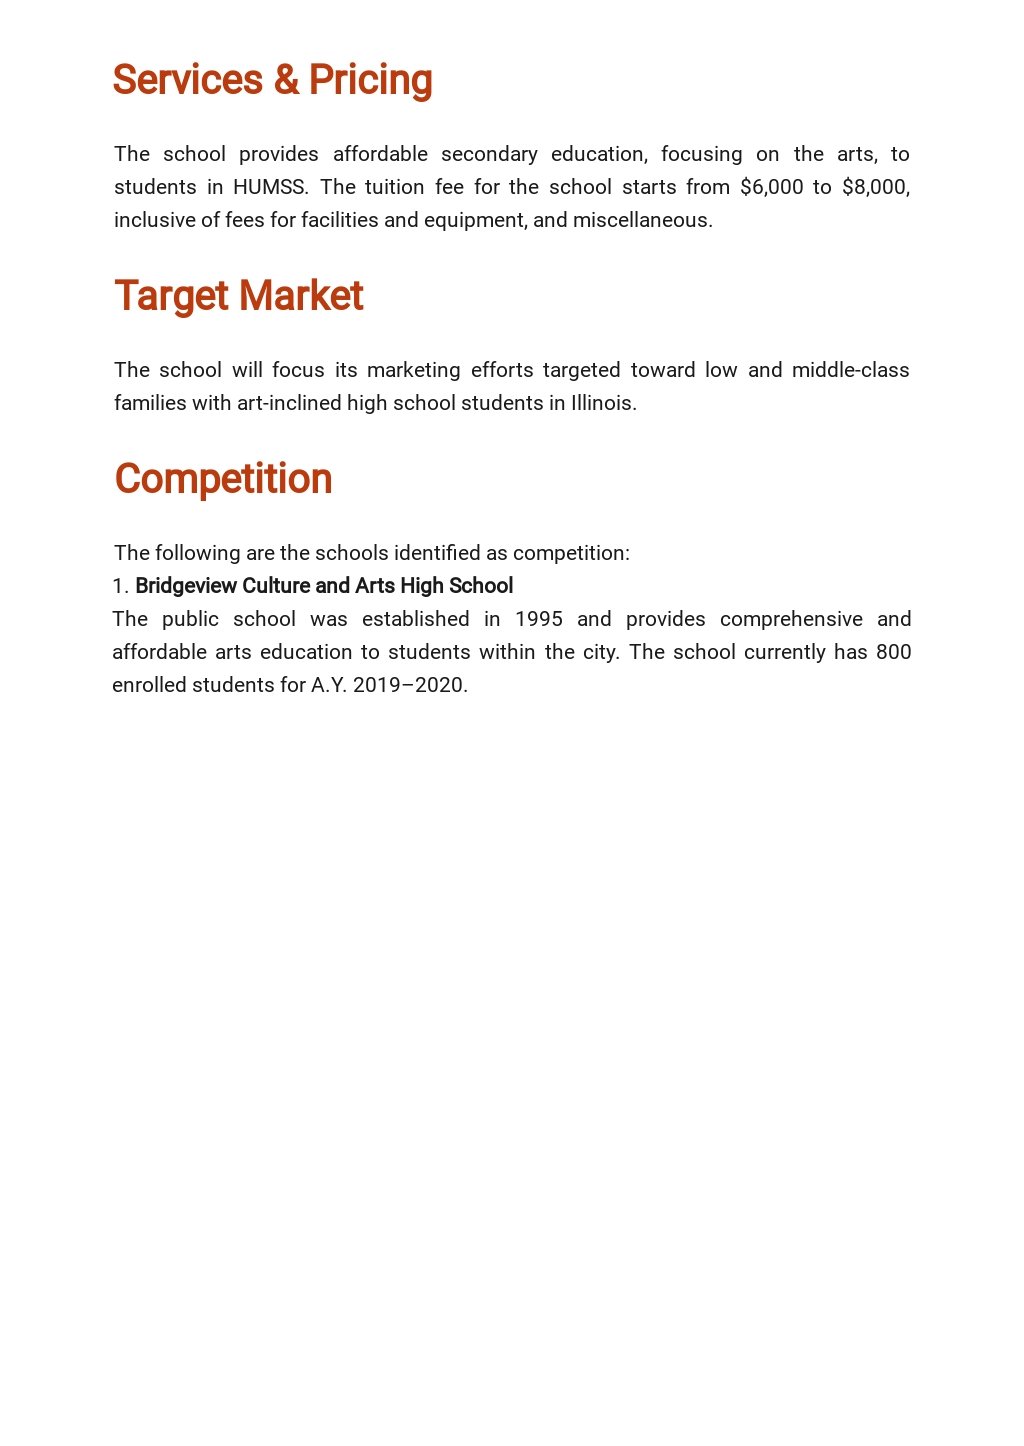 student business plan template